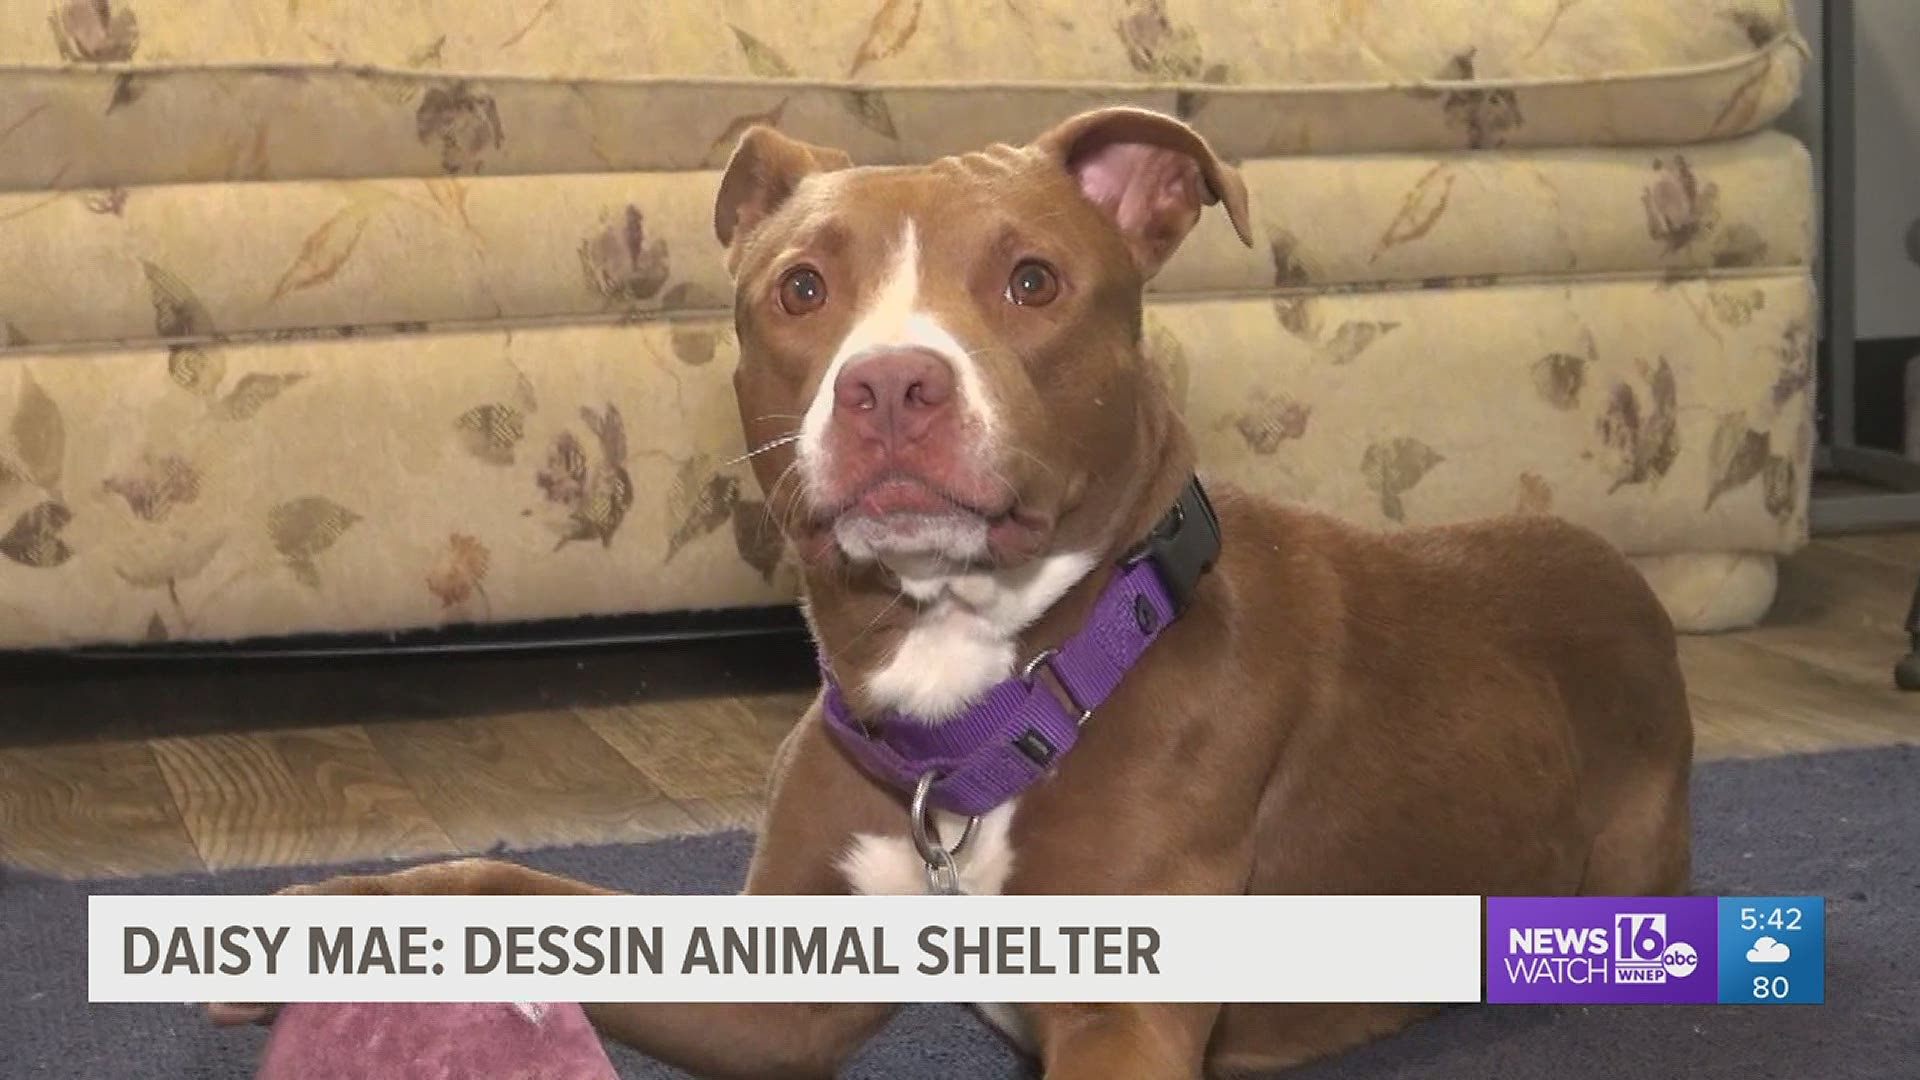 Daisy Mae recently came to the Dessin Animal Shelter from a hoarding situation.